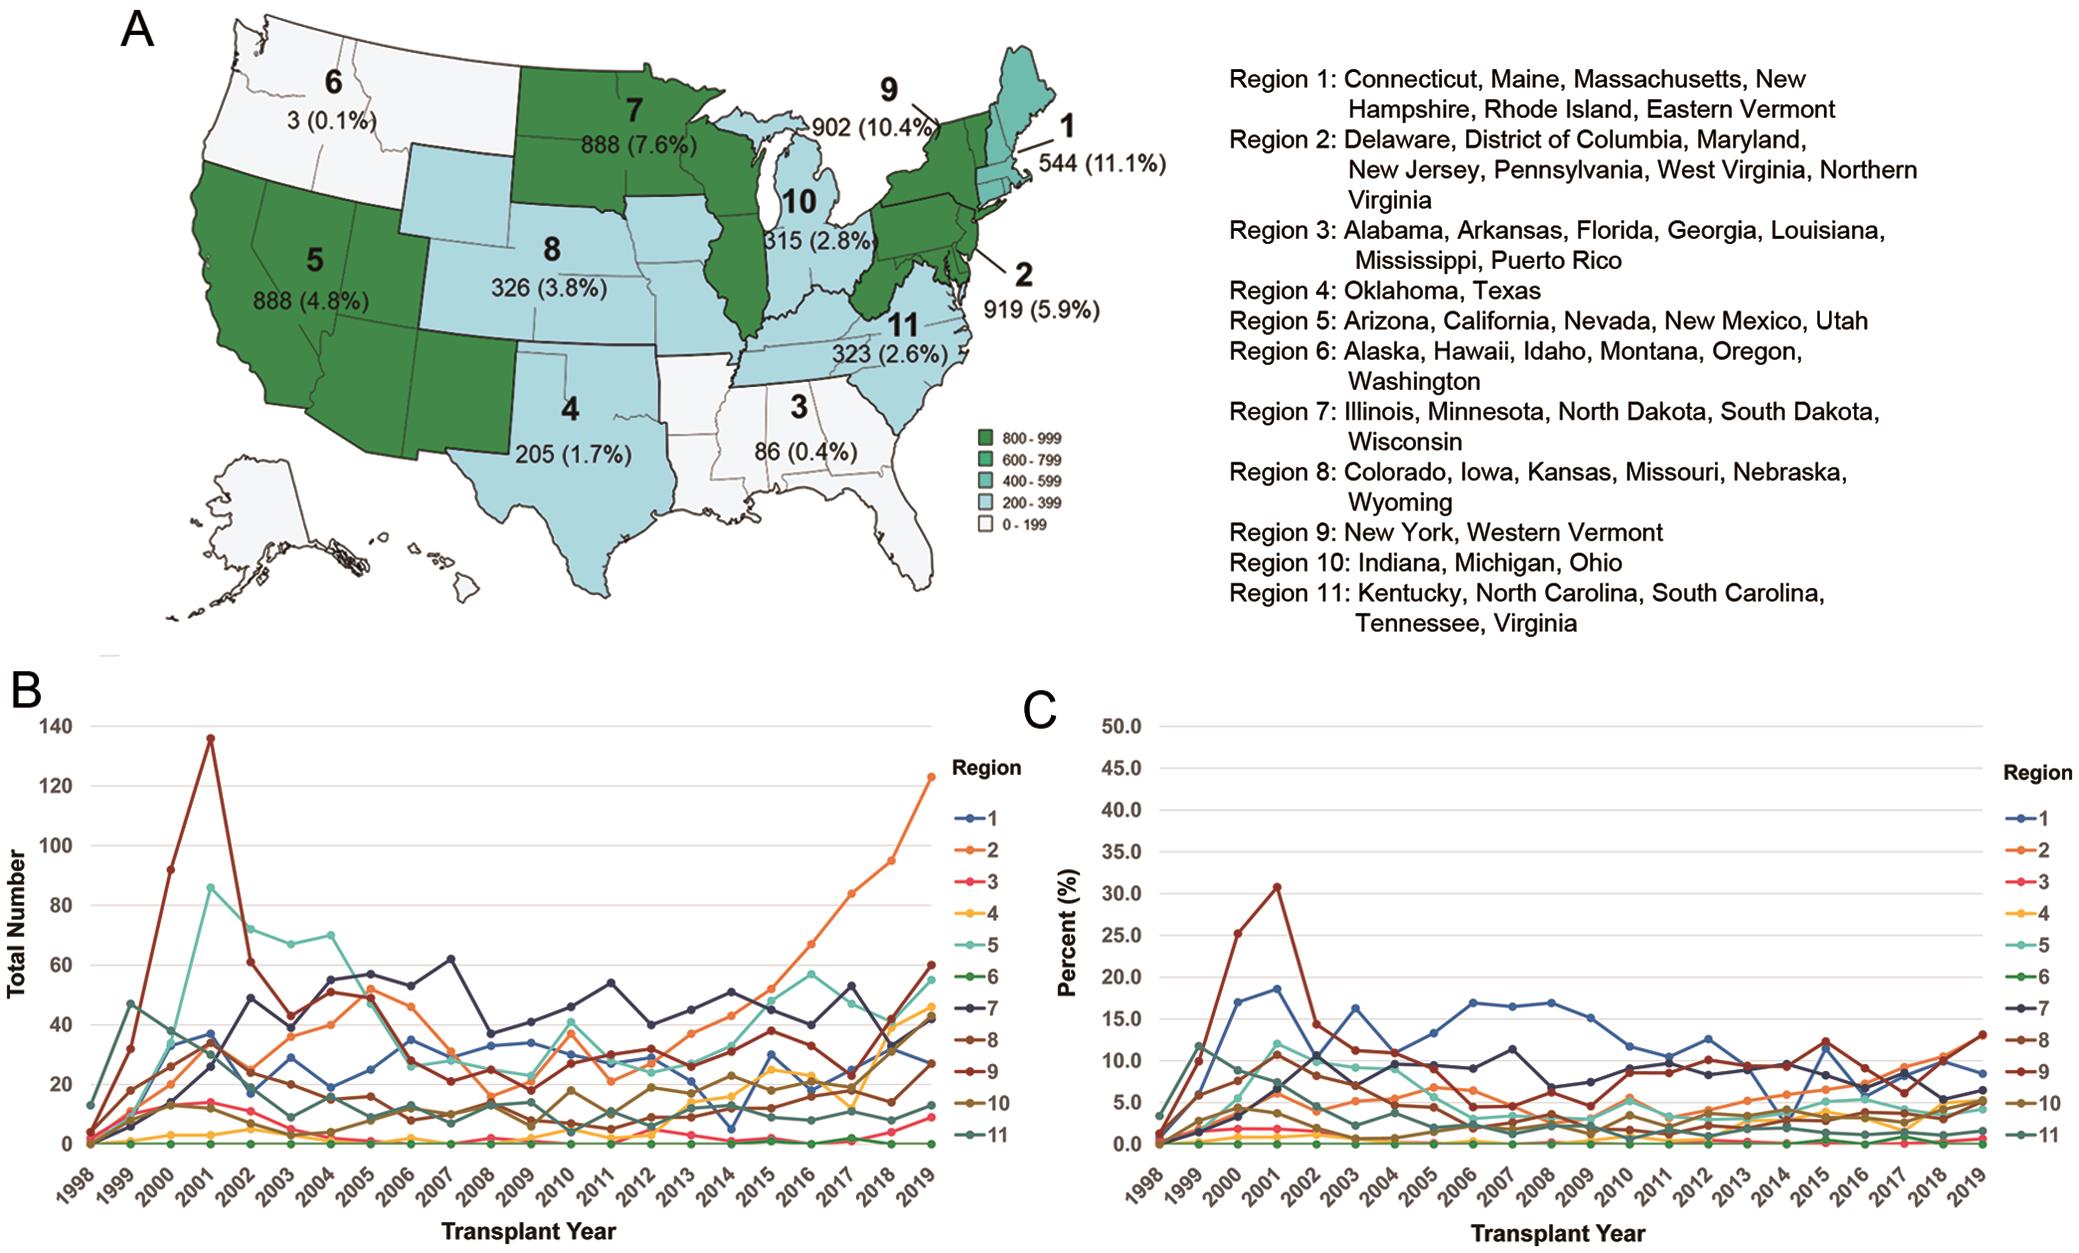 (A) LDLTs as a percentage of total LTs in each United States OPTN region from 1998 to 2019. (B) Annual trend of adult LDLTs in each OPTN region from 1998 to 2019. (C) Annual trend of adult LDLTs as a percentage of all LTs by OPTN region from 1998 to 2019.